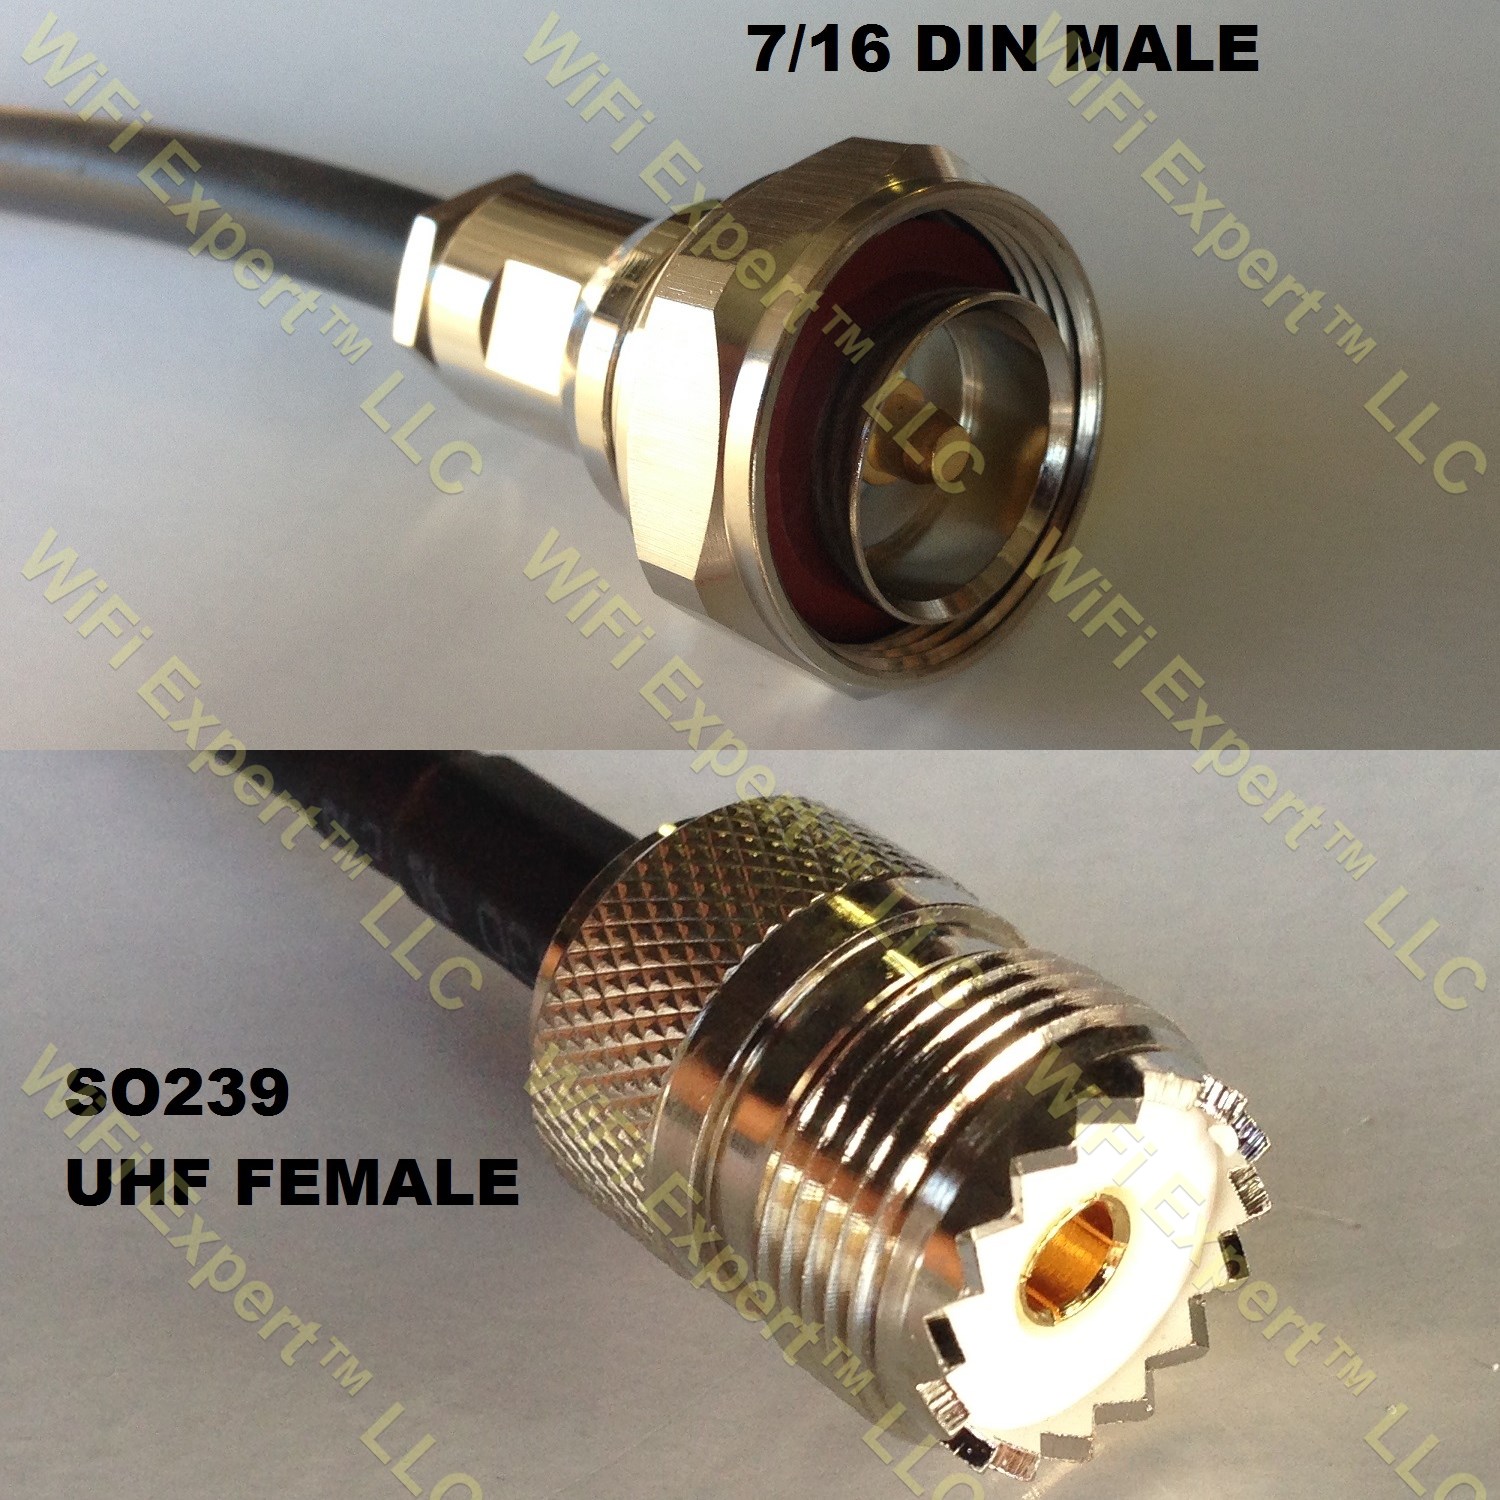 TIMES® RF pigtail cable UHF PL259 male to UHF SO239 female LMR400 10-100 FEET US 